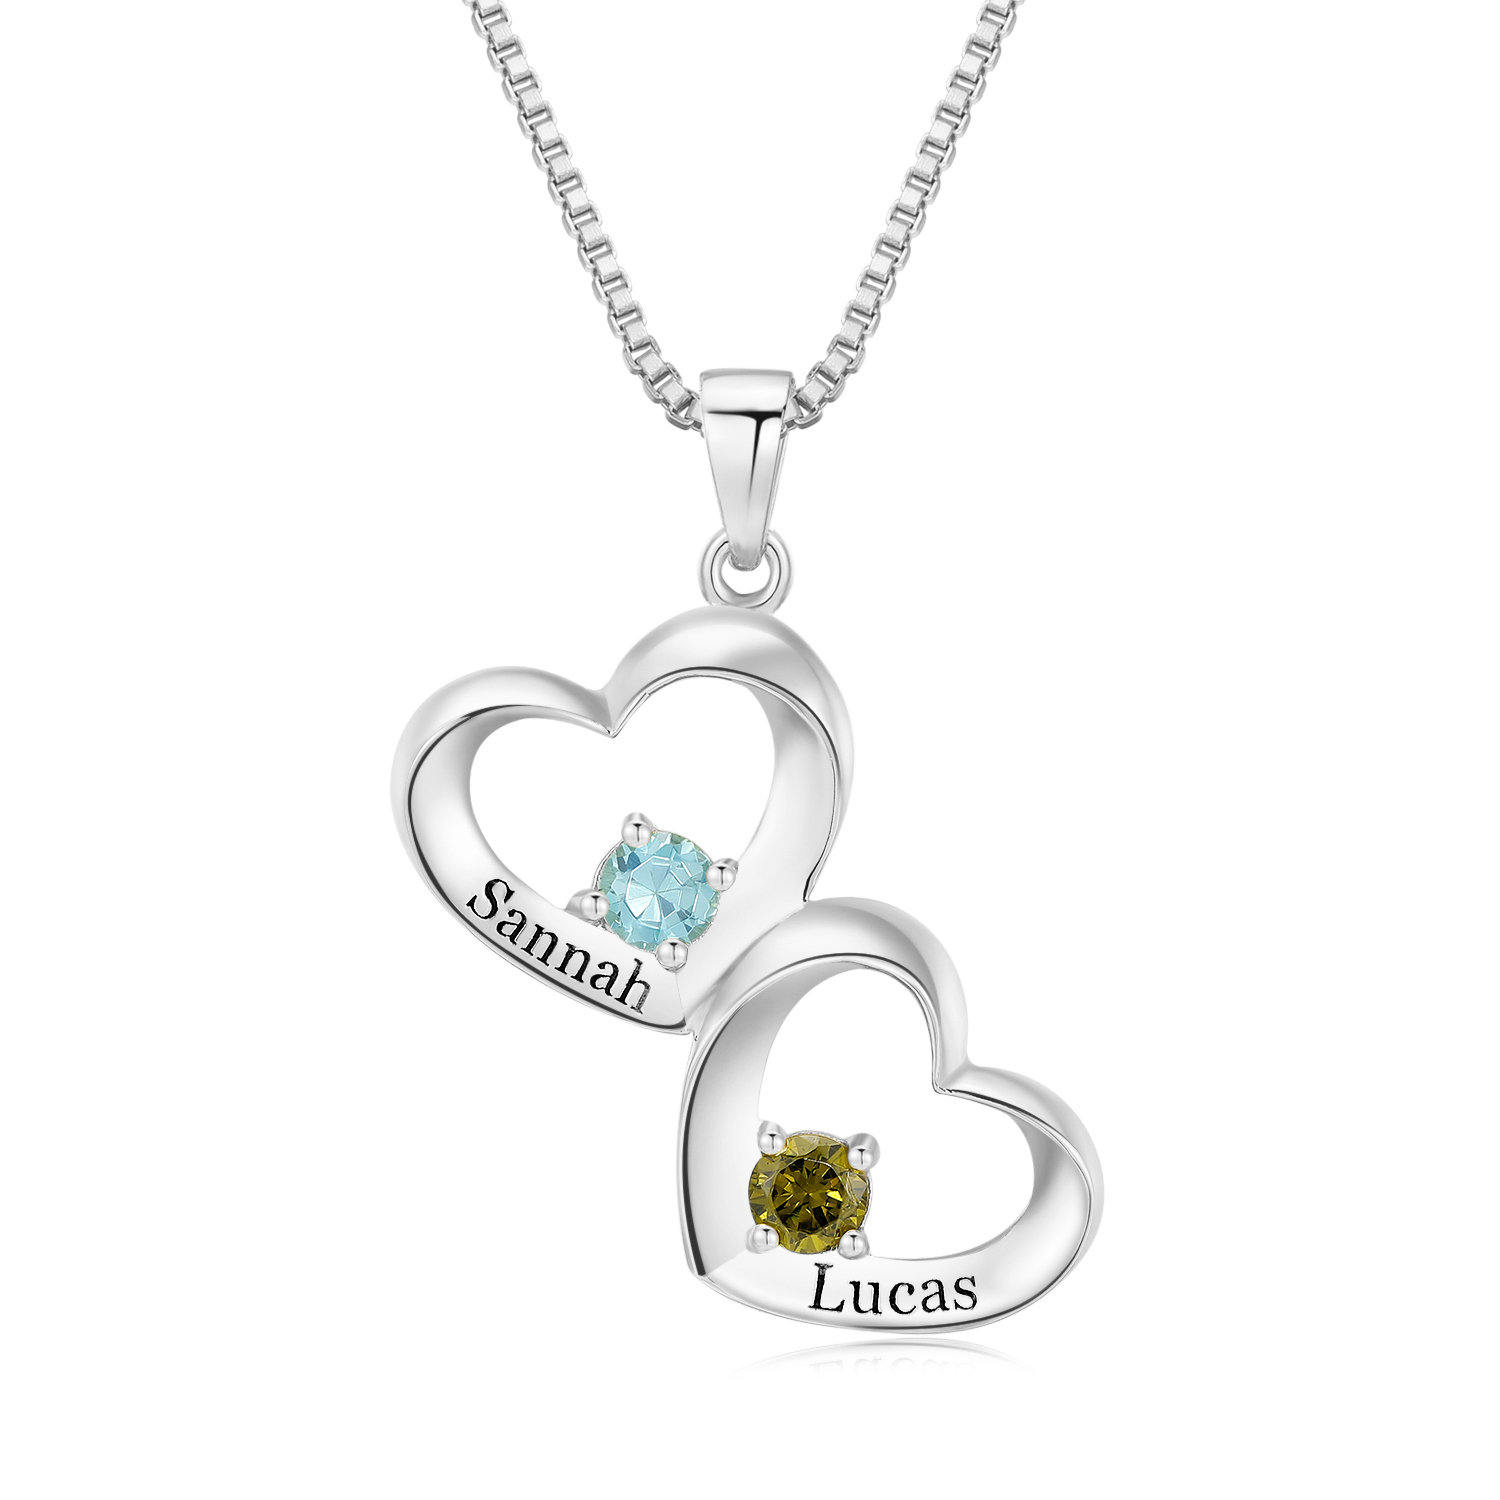 Double Heart in One Necklace for Couples